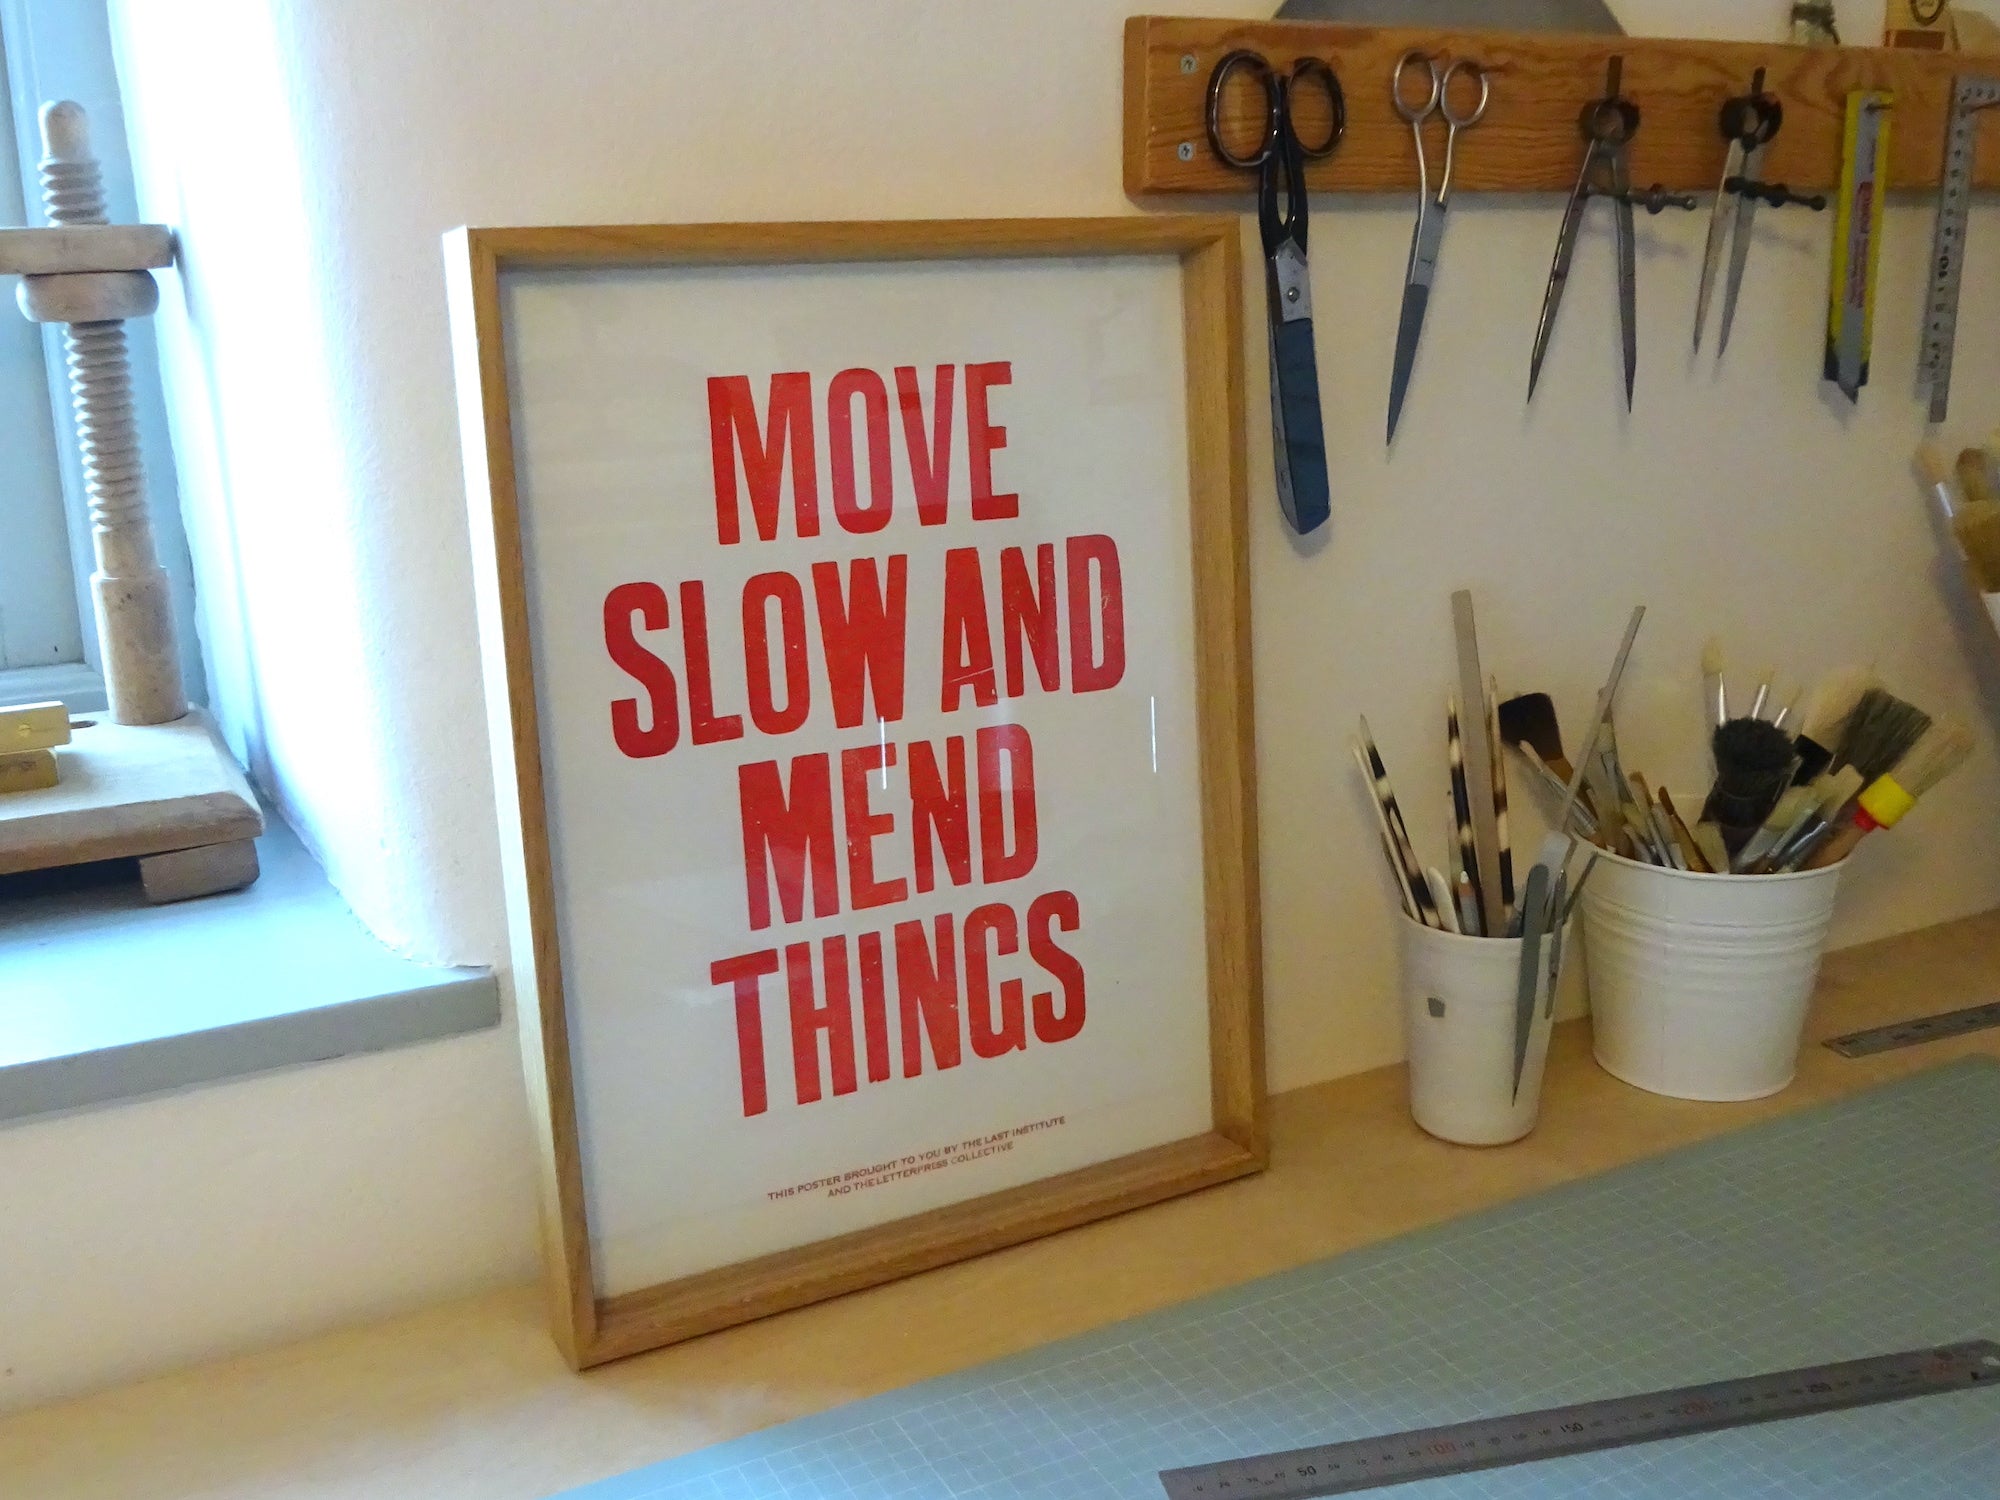 Move slow and mend things letterpress poster in bookbinding studio